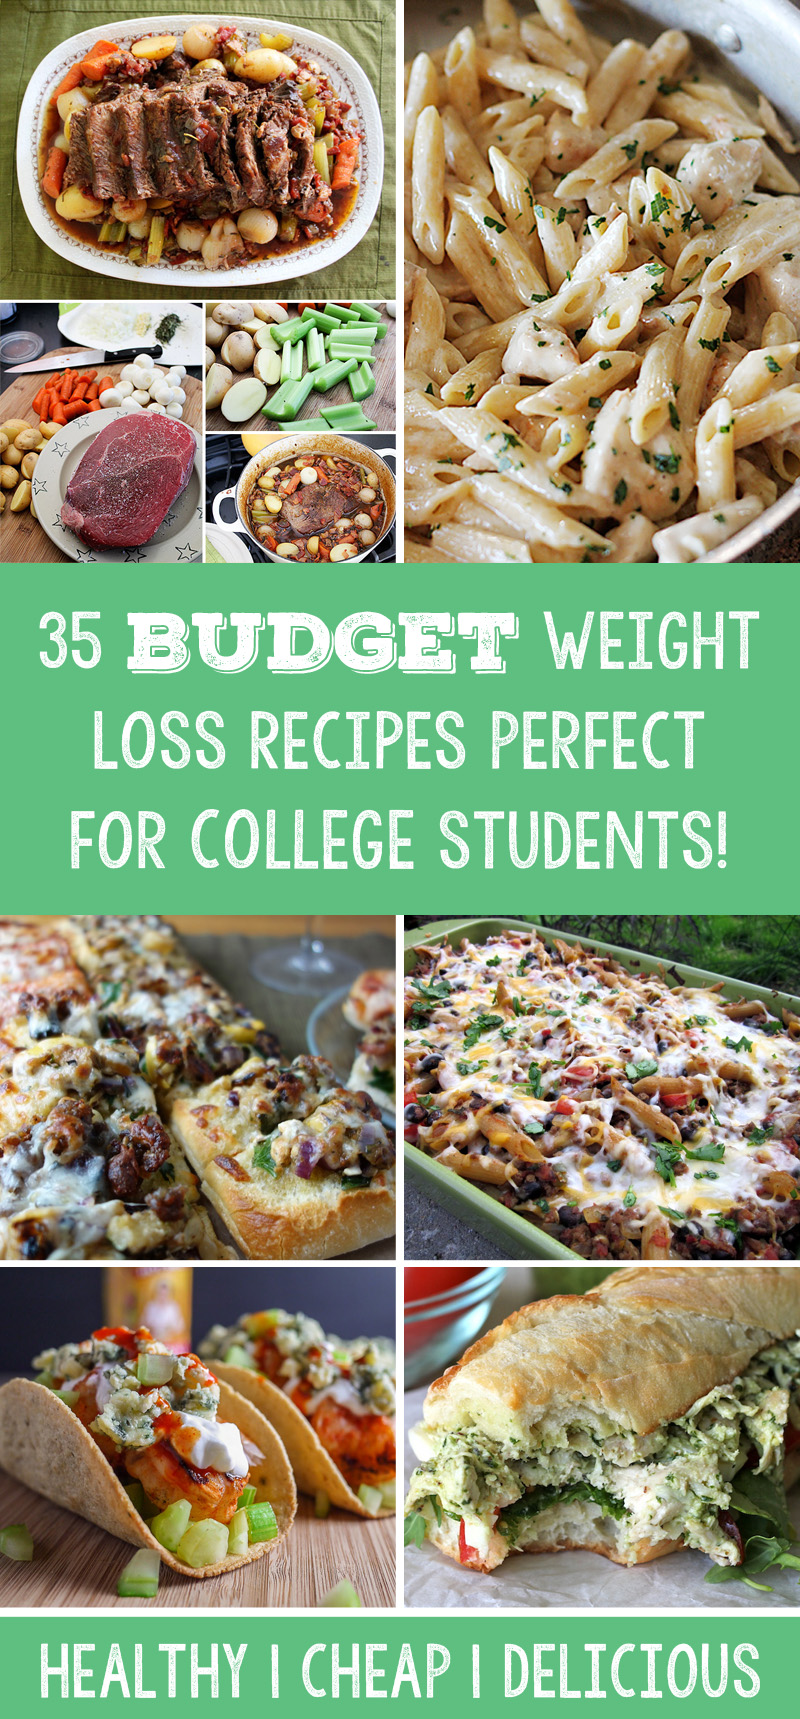 35 Budget Weight Loss Recipes Perfect For College Students!